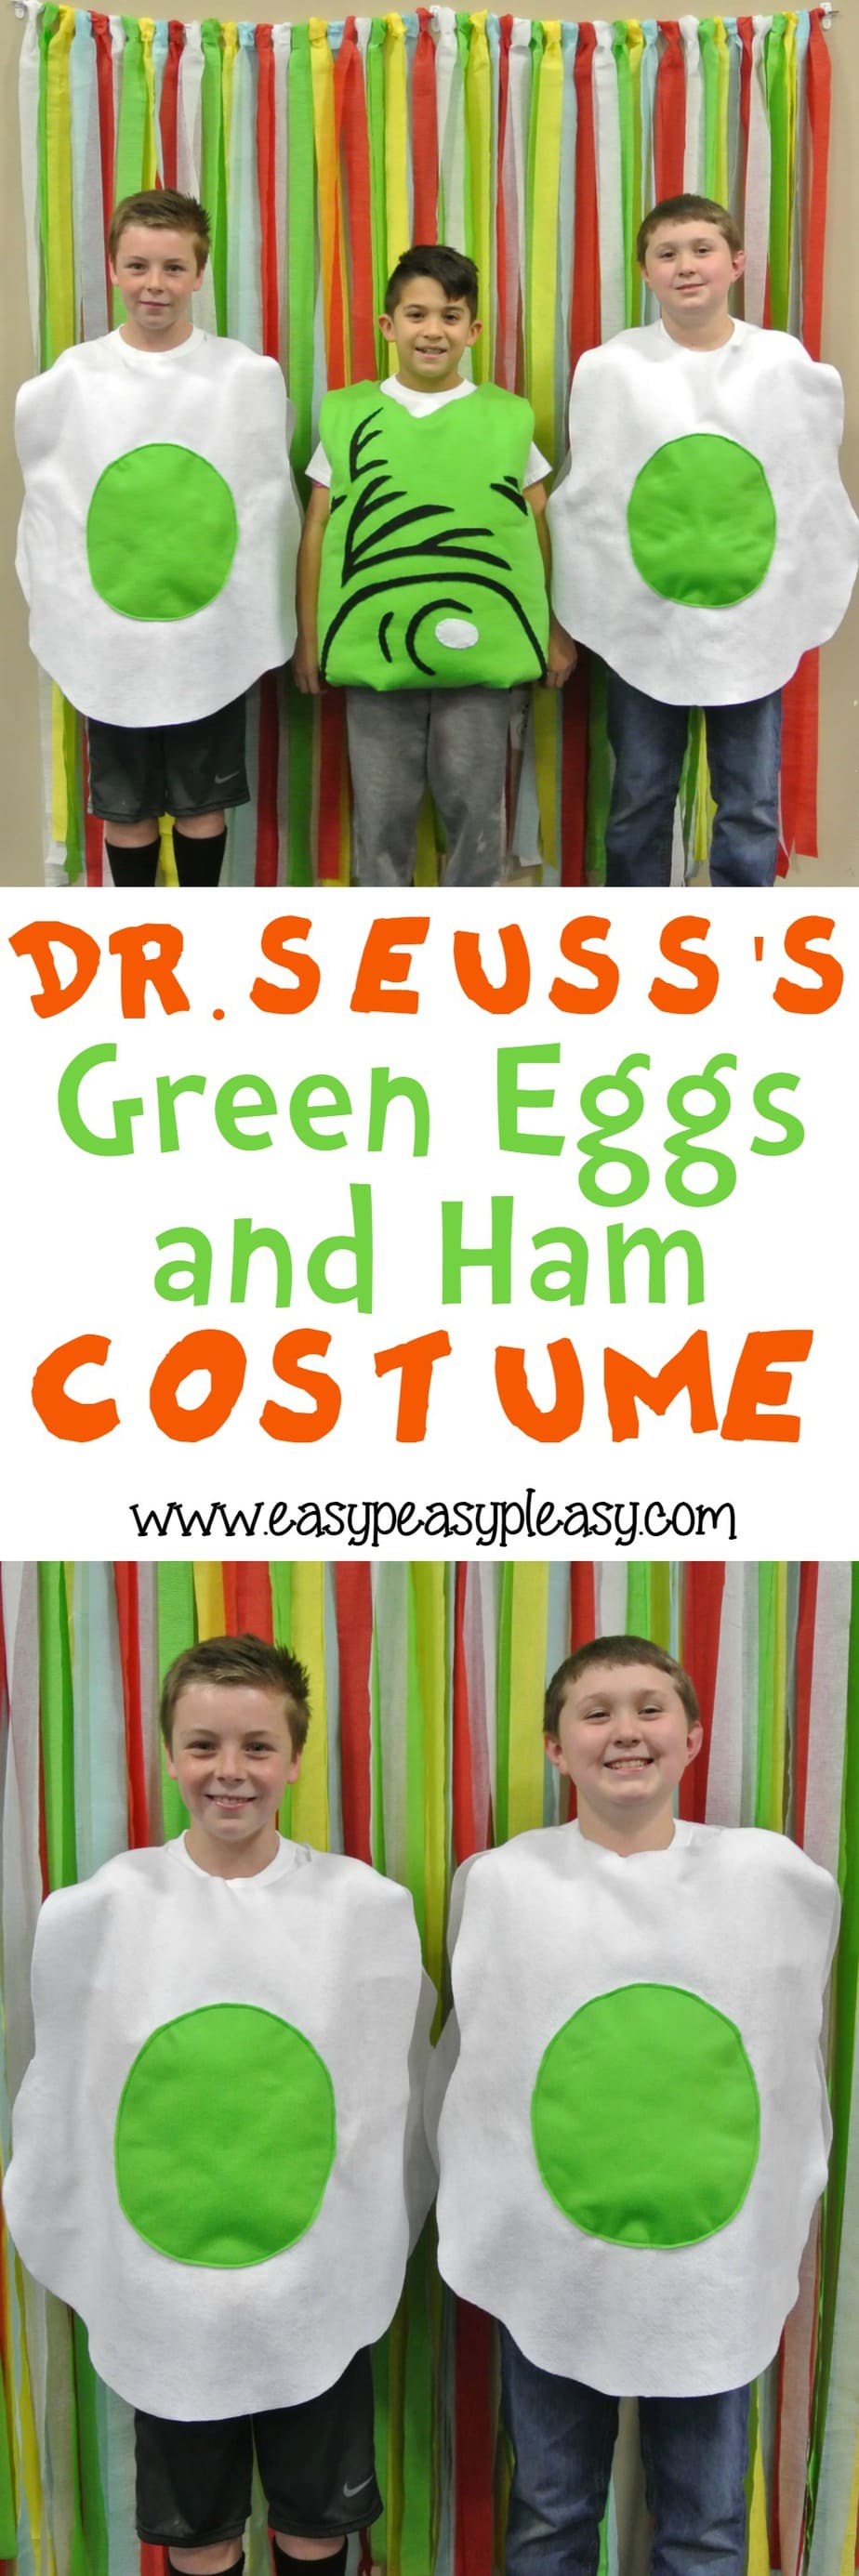 Easy DIY Tutorial to make Dr. Seuss's Green Eggs and Ham Costume for Read Across America Week and Halloween!